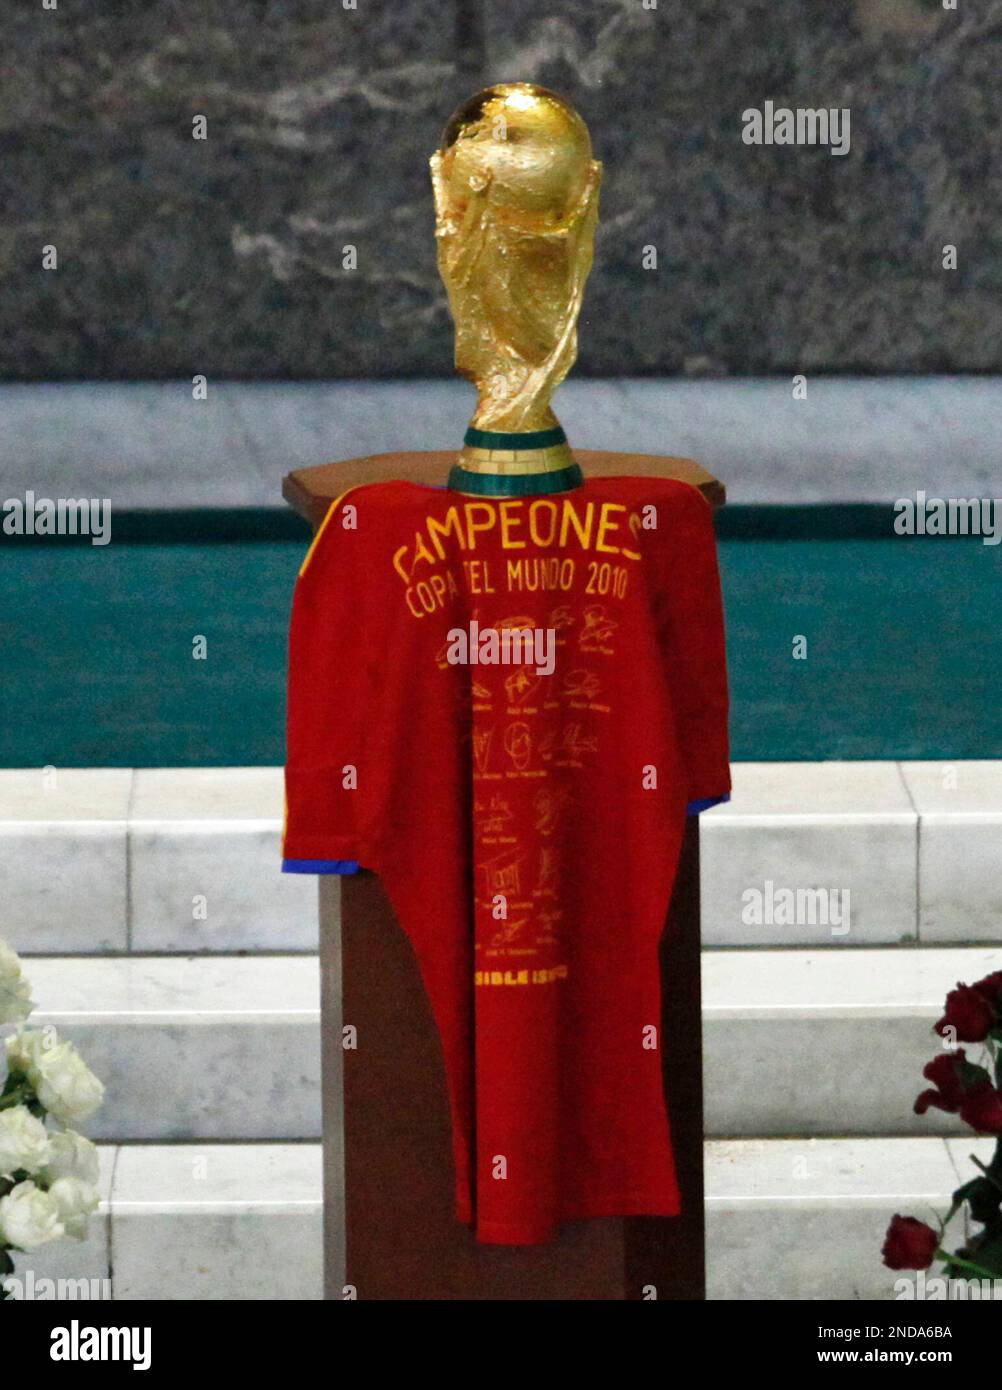 The World Cup trophy sits on a Spanish national soccer team jersey during a mass at the Basilica of Guadalupe in Mexico City, Tuesday, Aug. 10, 2010. Spain will face Mexico in a friendly soccer match on Wednesday, Aug. 11. (AP Photo/Eduardo Verdugo) Stock Photo